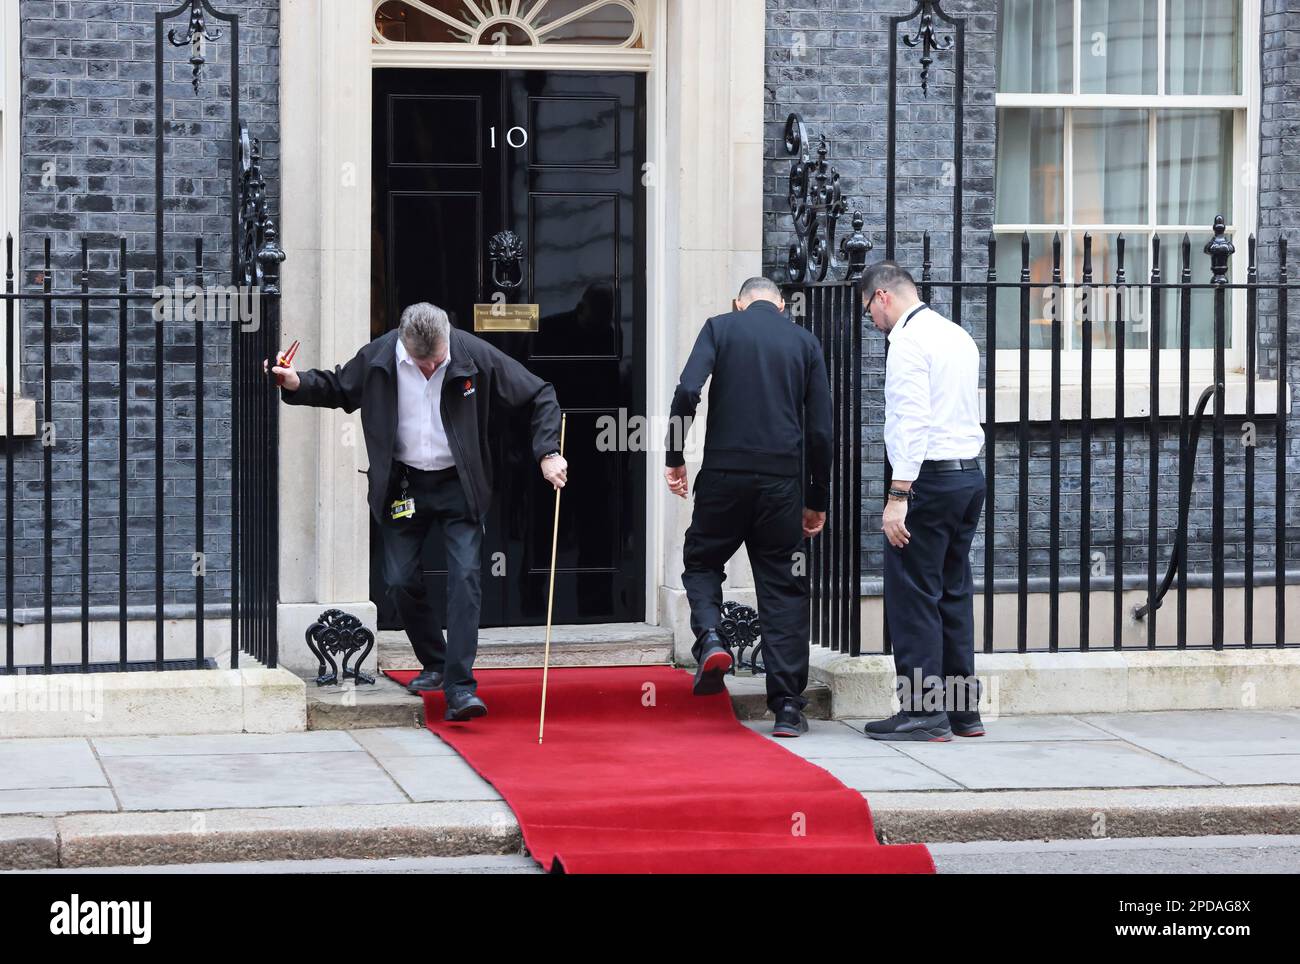 Rolling out the red carpet at no. 10 Downing Street, London, UK Stock Photo